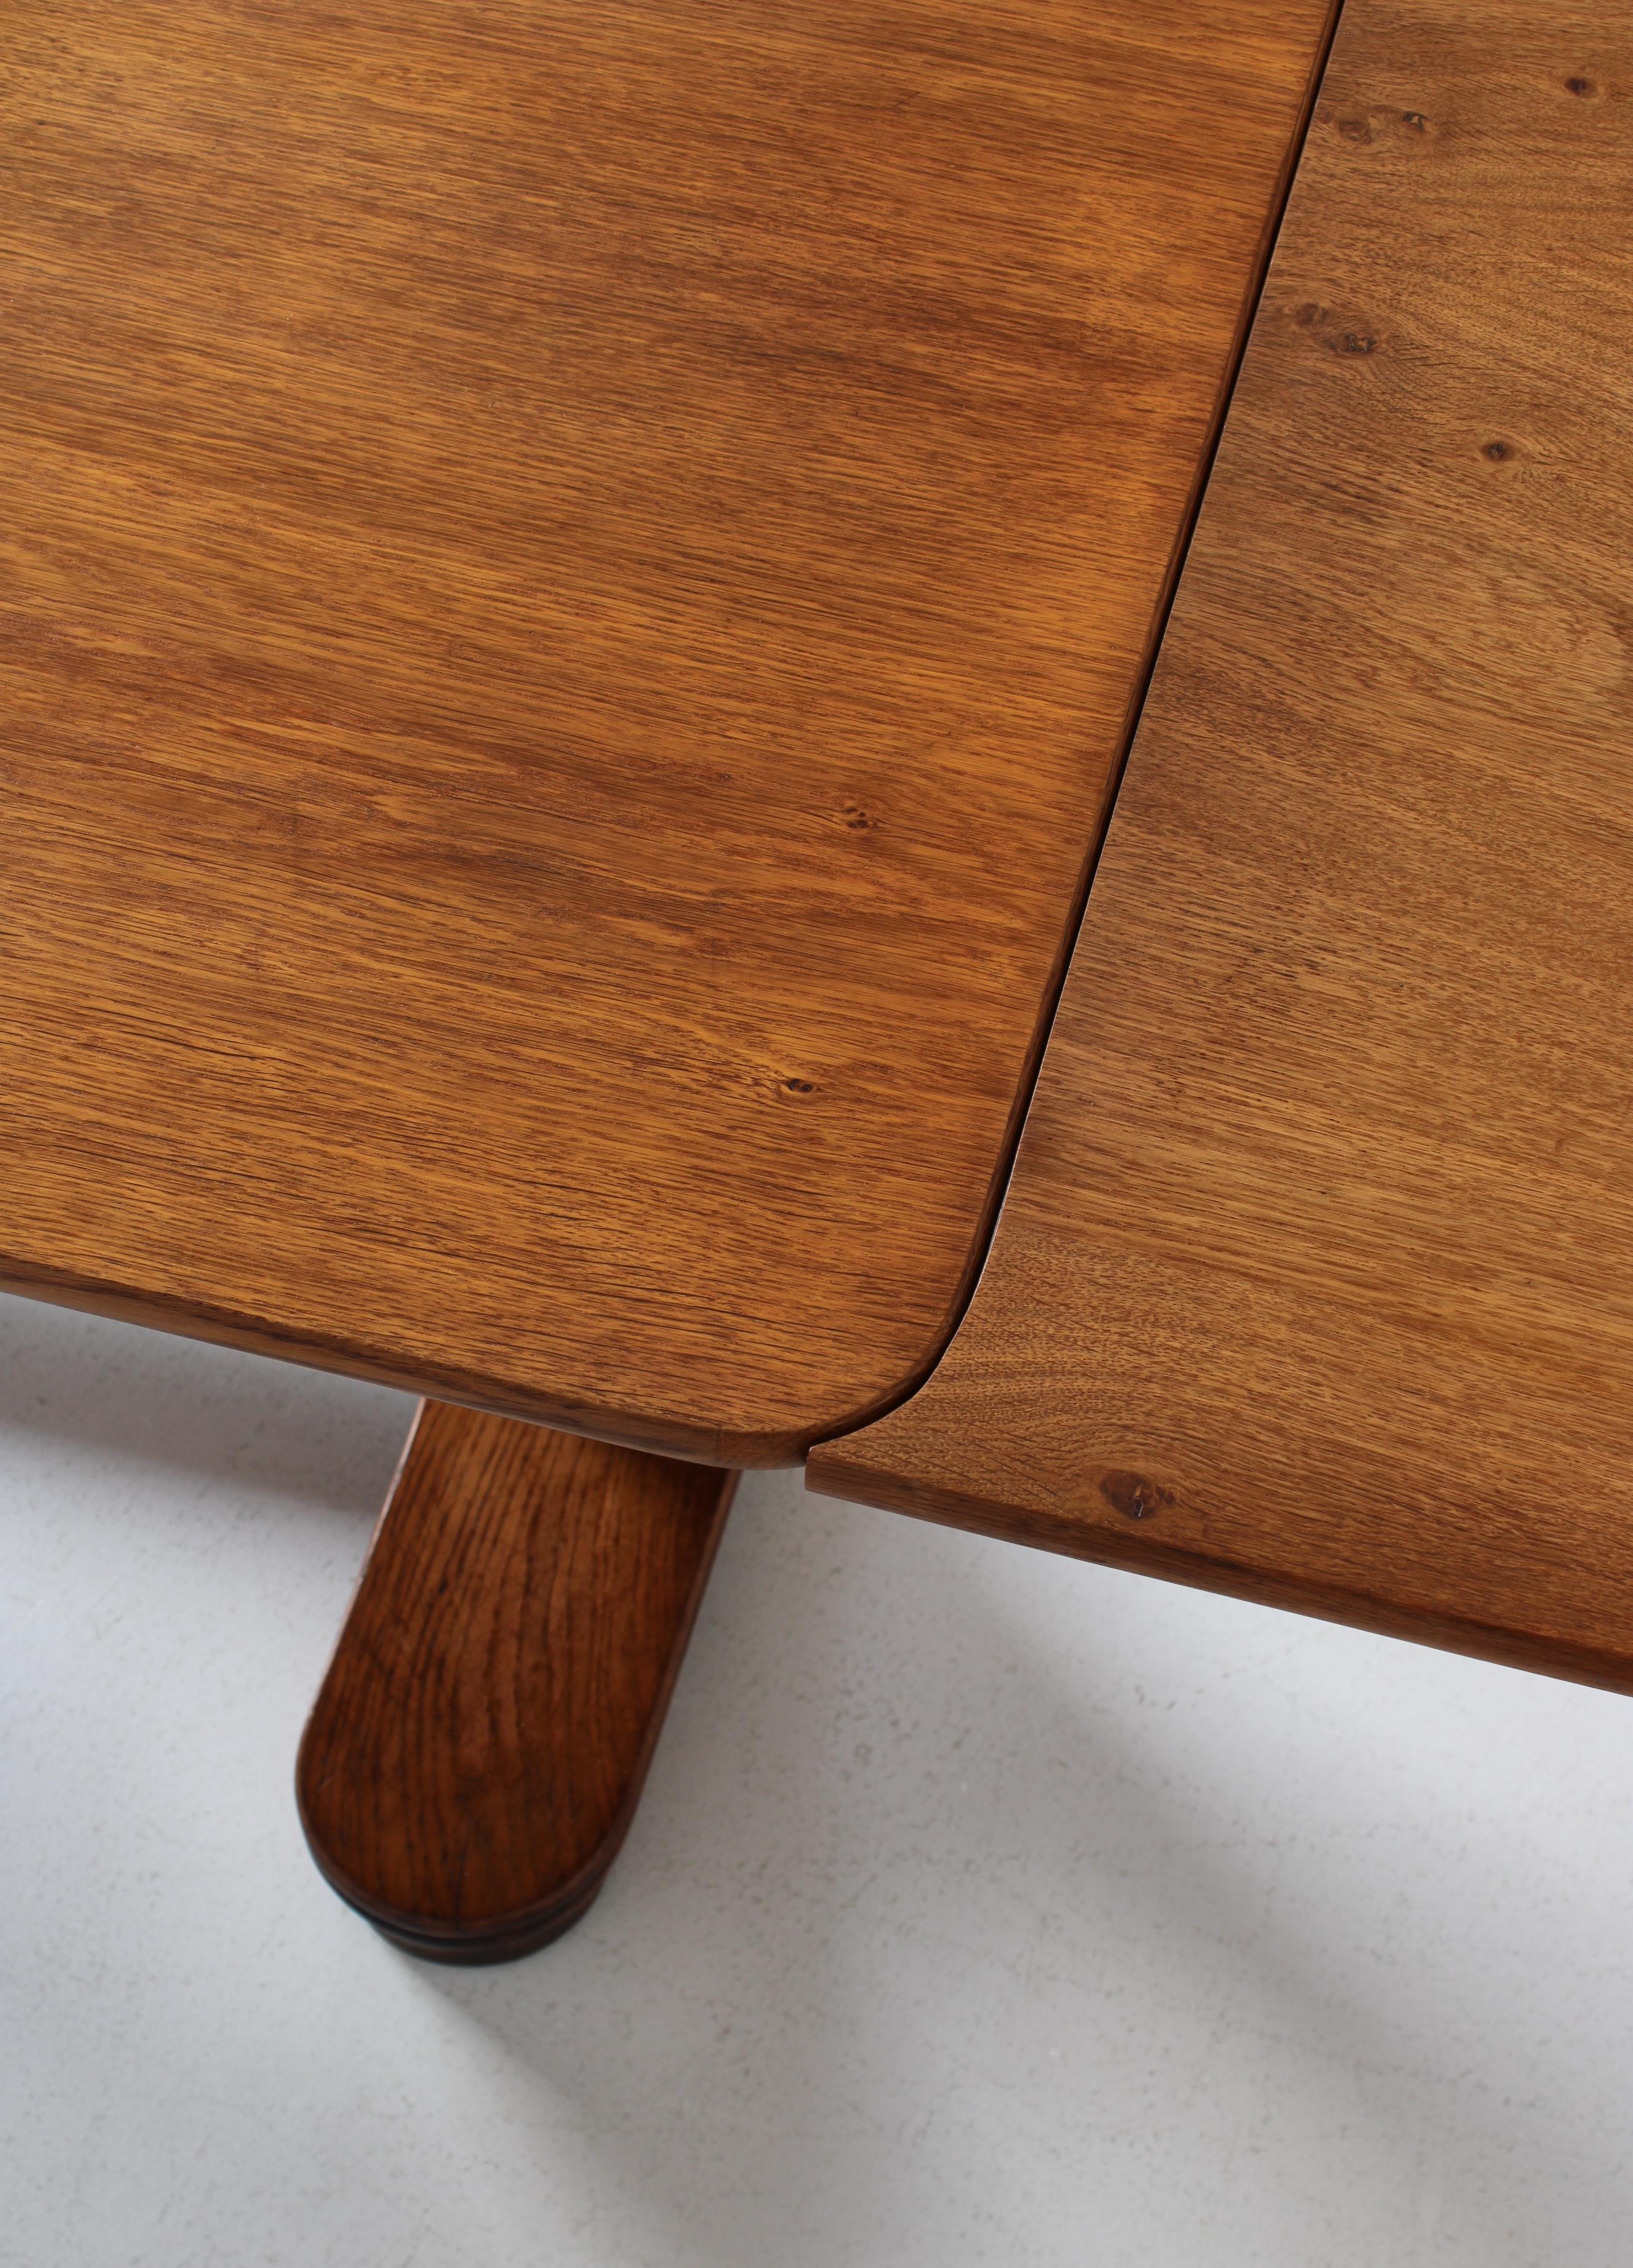 Art Deco Table by Danish Cabinetmaker in Patinated Oak, 1930s For Sale 10